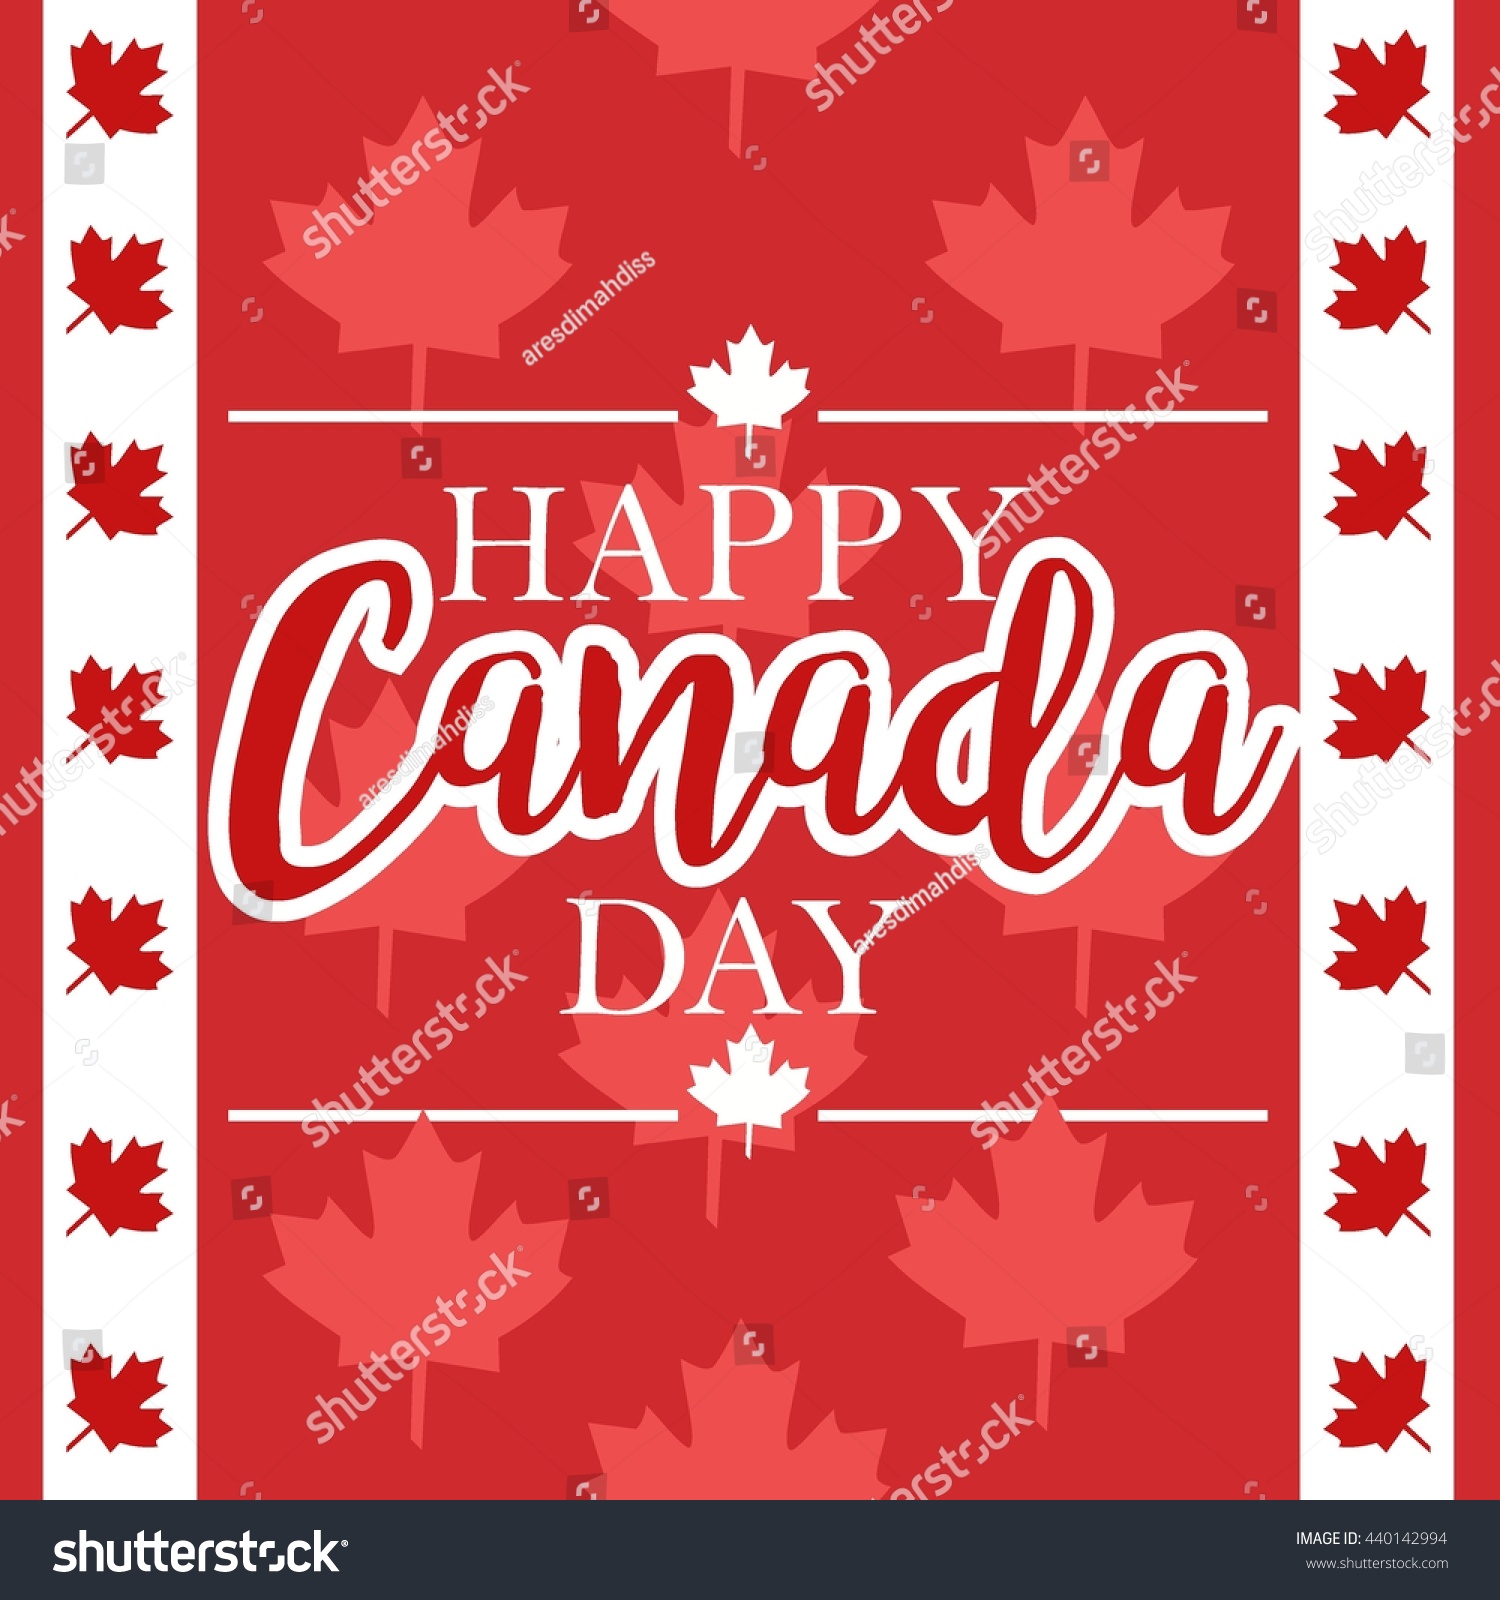 Happy Canada Day Poster Template Royalty Free Stock Vector 440142994